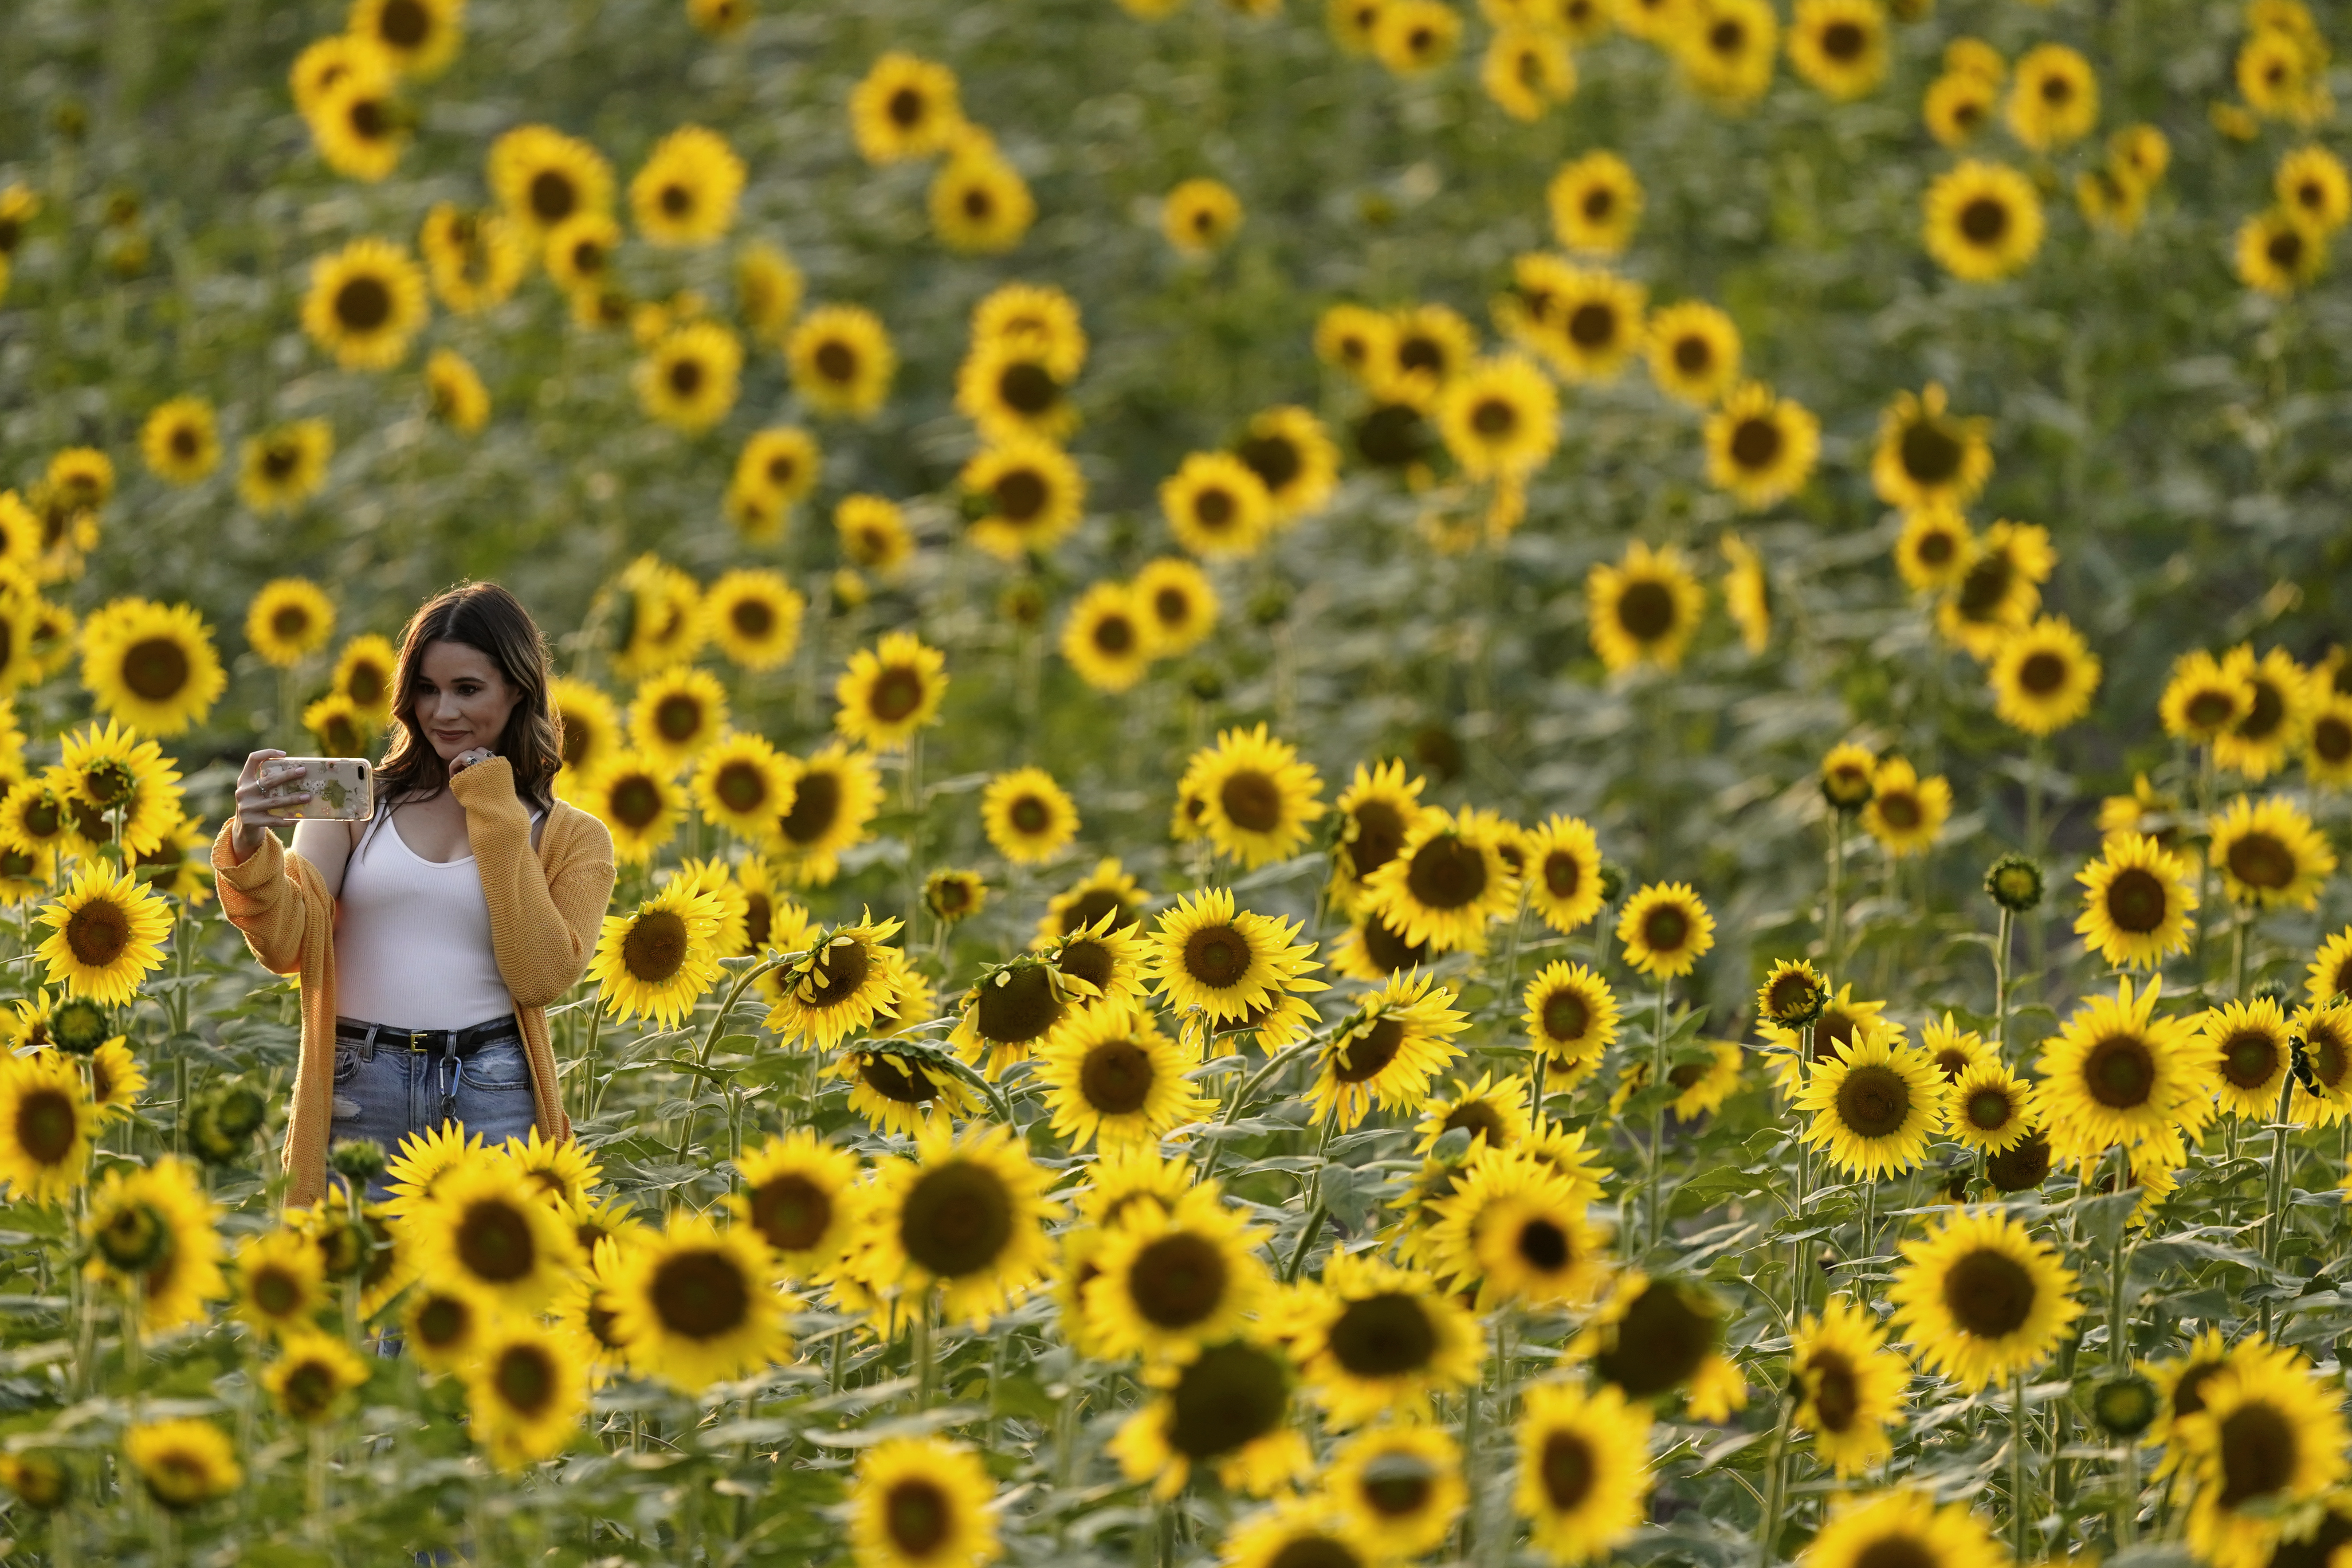 A woman takes a photo in a sunflower field at Grinter Farms, Monday, Sept. 7, 2019, near Lawrence, Kan. The 26-acre field, planted annually by the Grinter family, draws thousands of visitors during the weeklong late summer blossoming of the flowers. (AP Photo/Charlie Riedel)